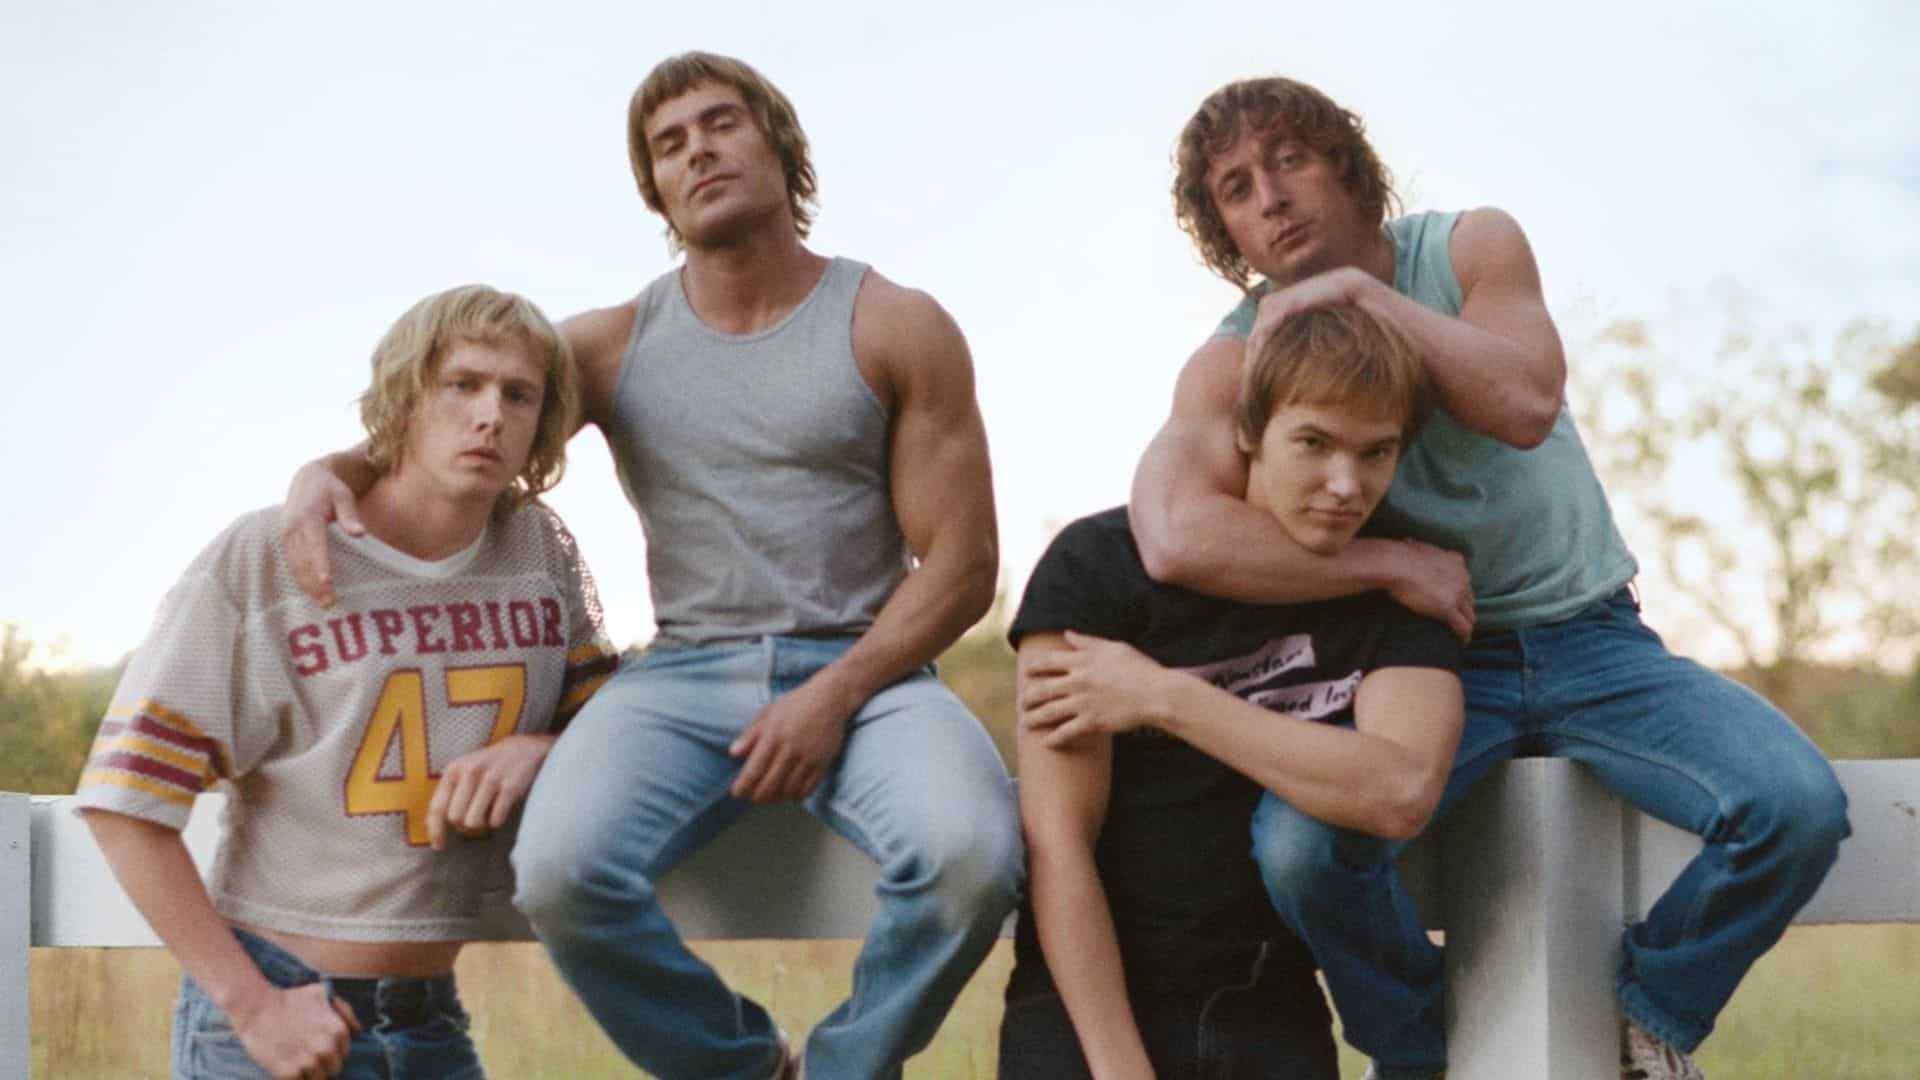 Four brothers pose together on a fence in this image from A24.